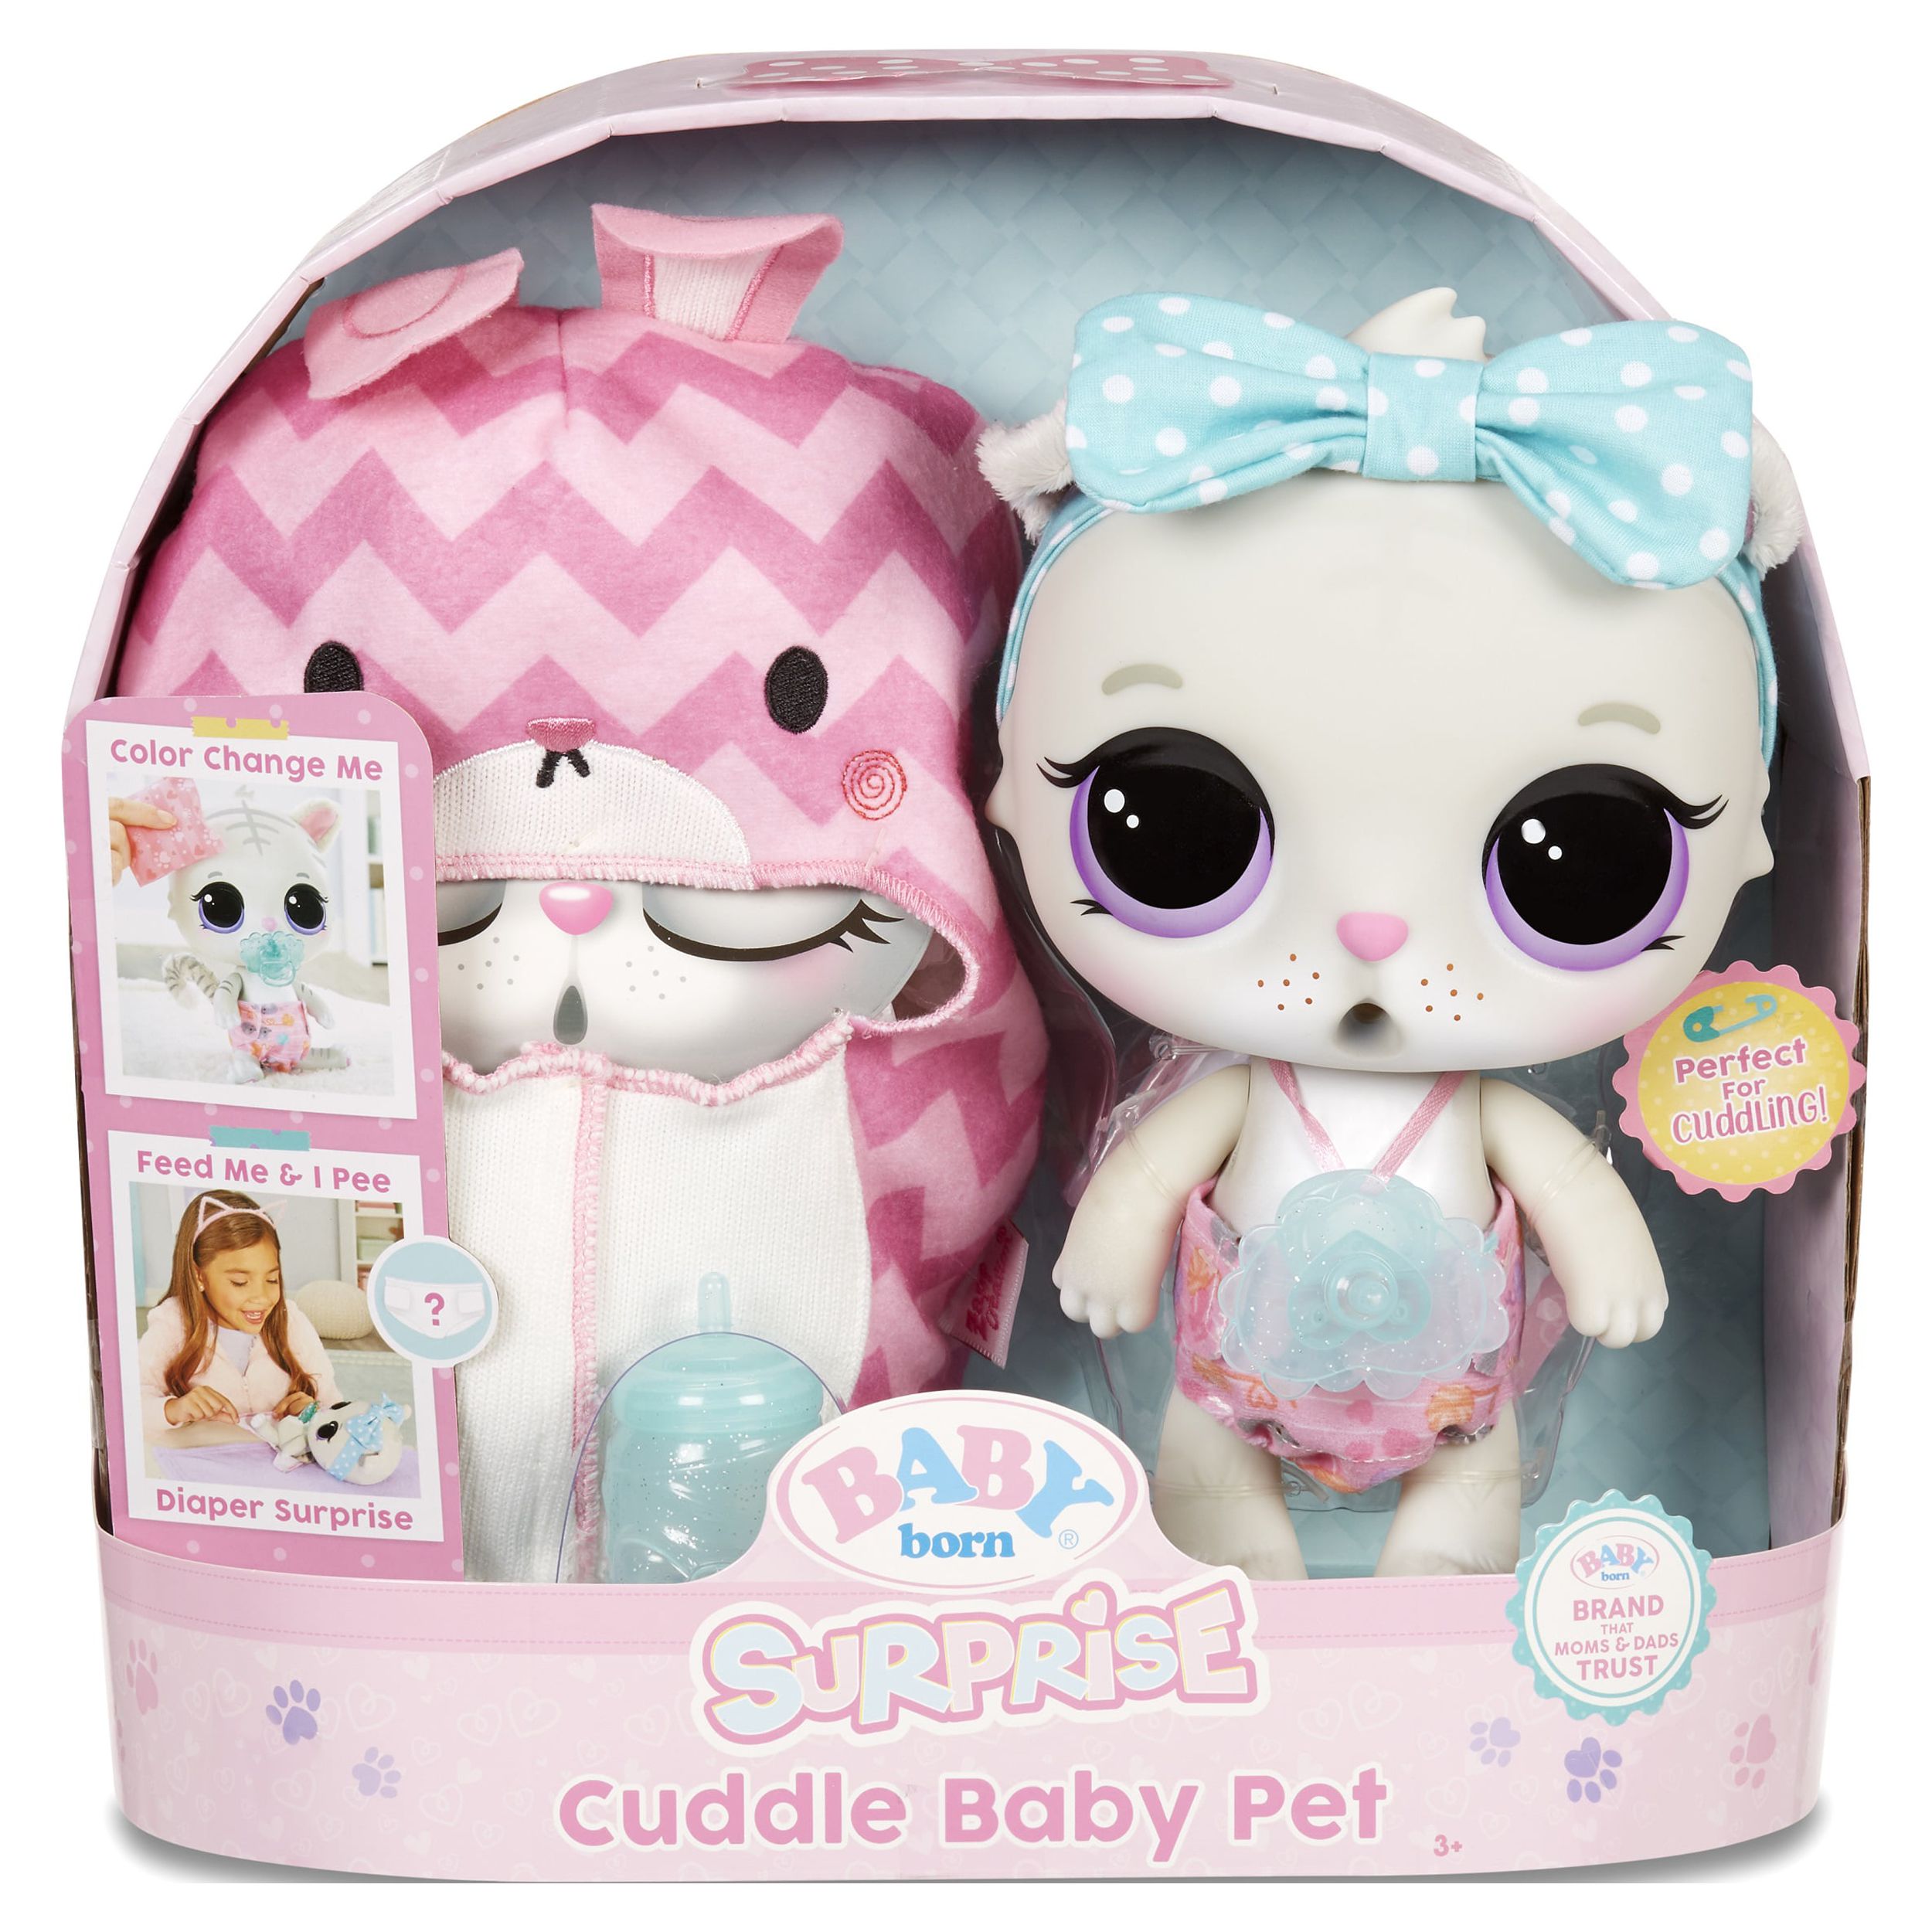 Baby Born 12" Surprise Cuddle Baby Pet Kitty Really Drinks & Pees Plush Toy - image 3 of 6